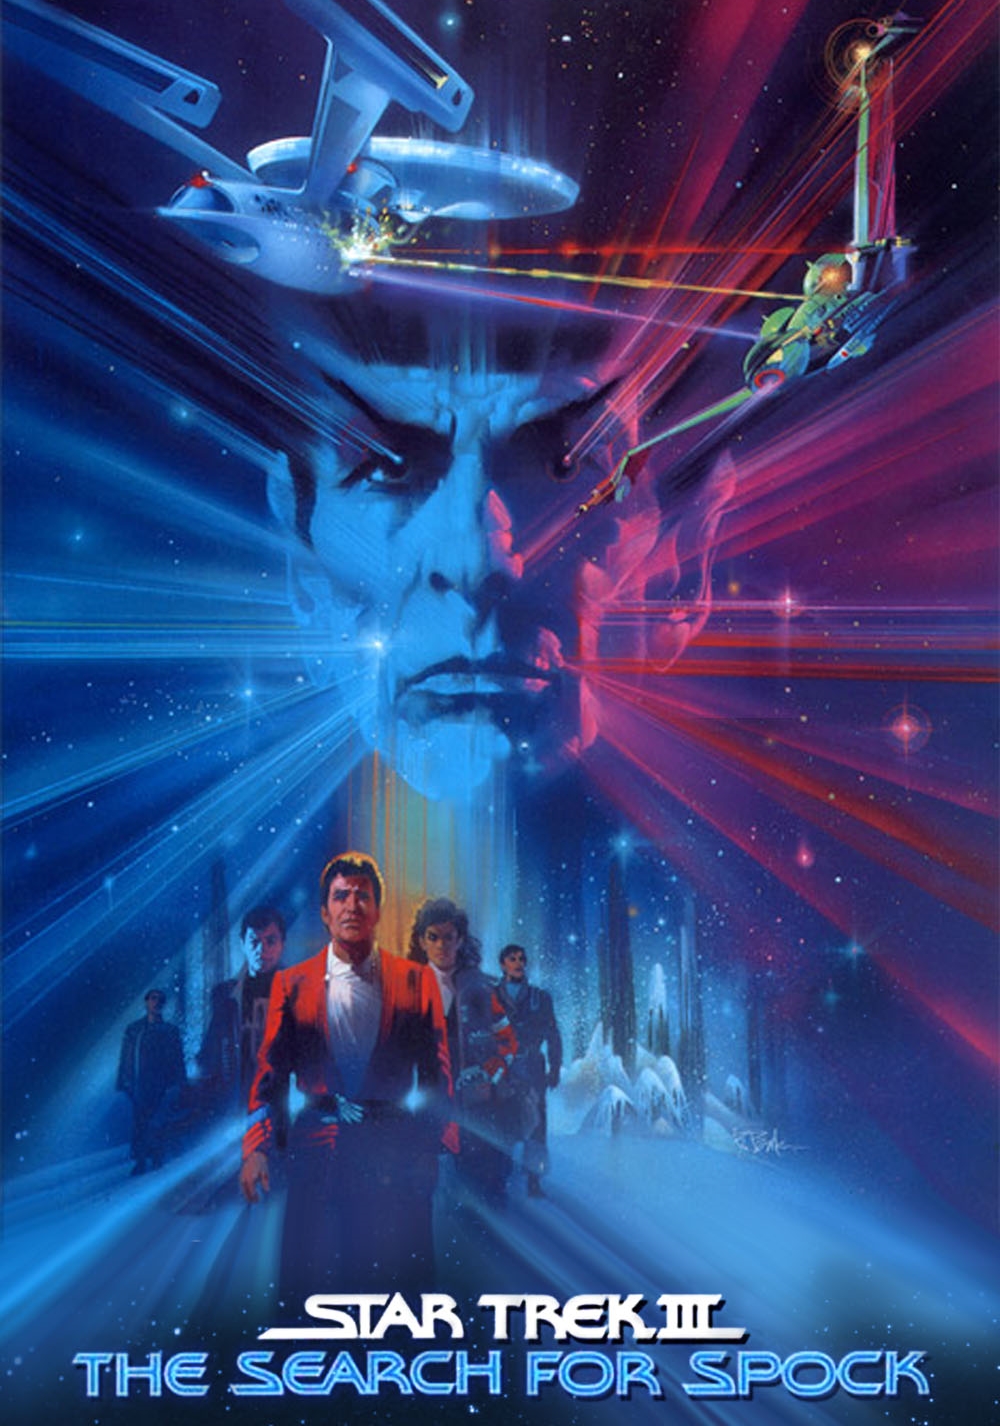 star trek iii the search for spock 5218fc4f1d69a